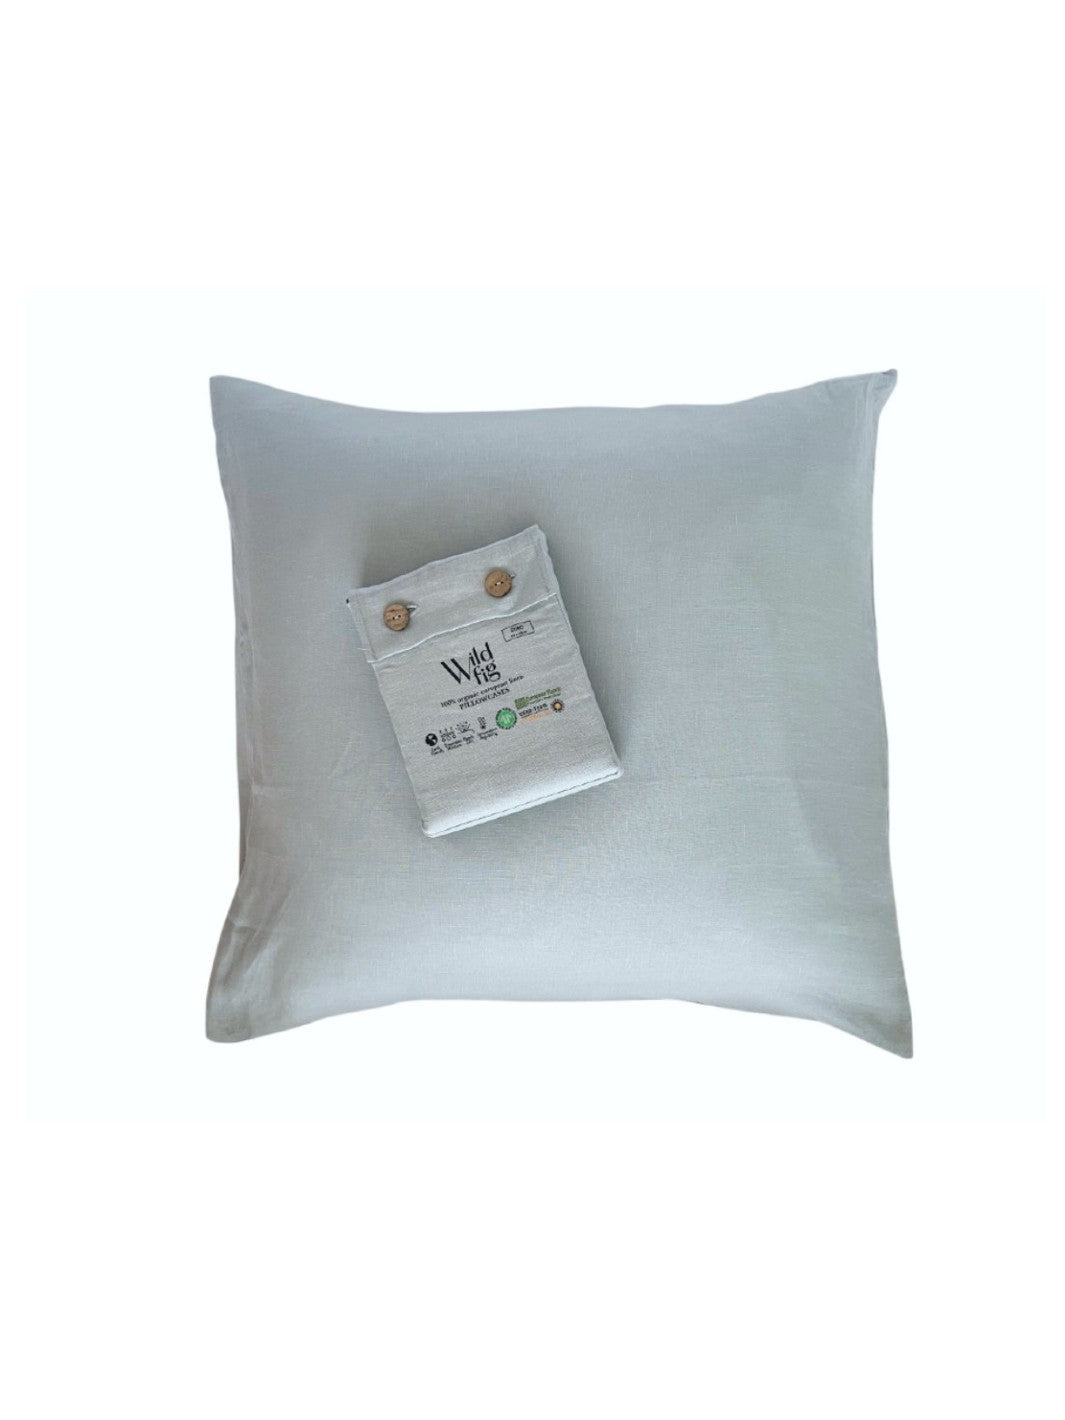 PROVINCIAL EURO LINEN PILLOW CASES ORGANIC PACK OF 2